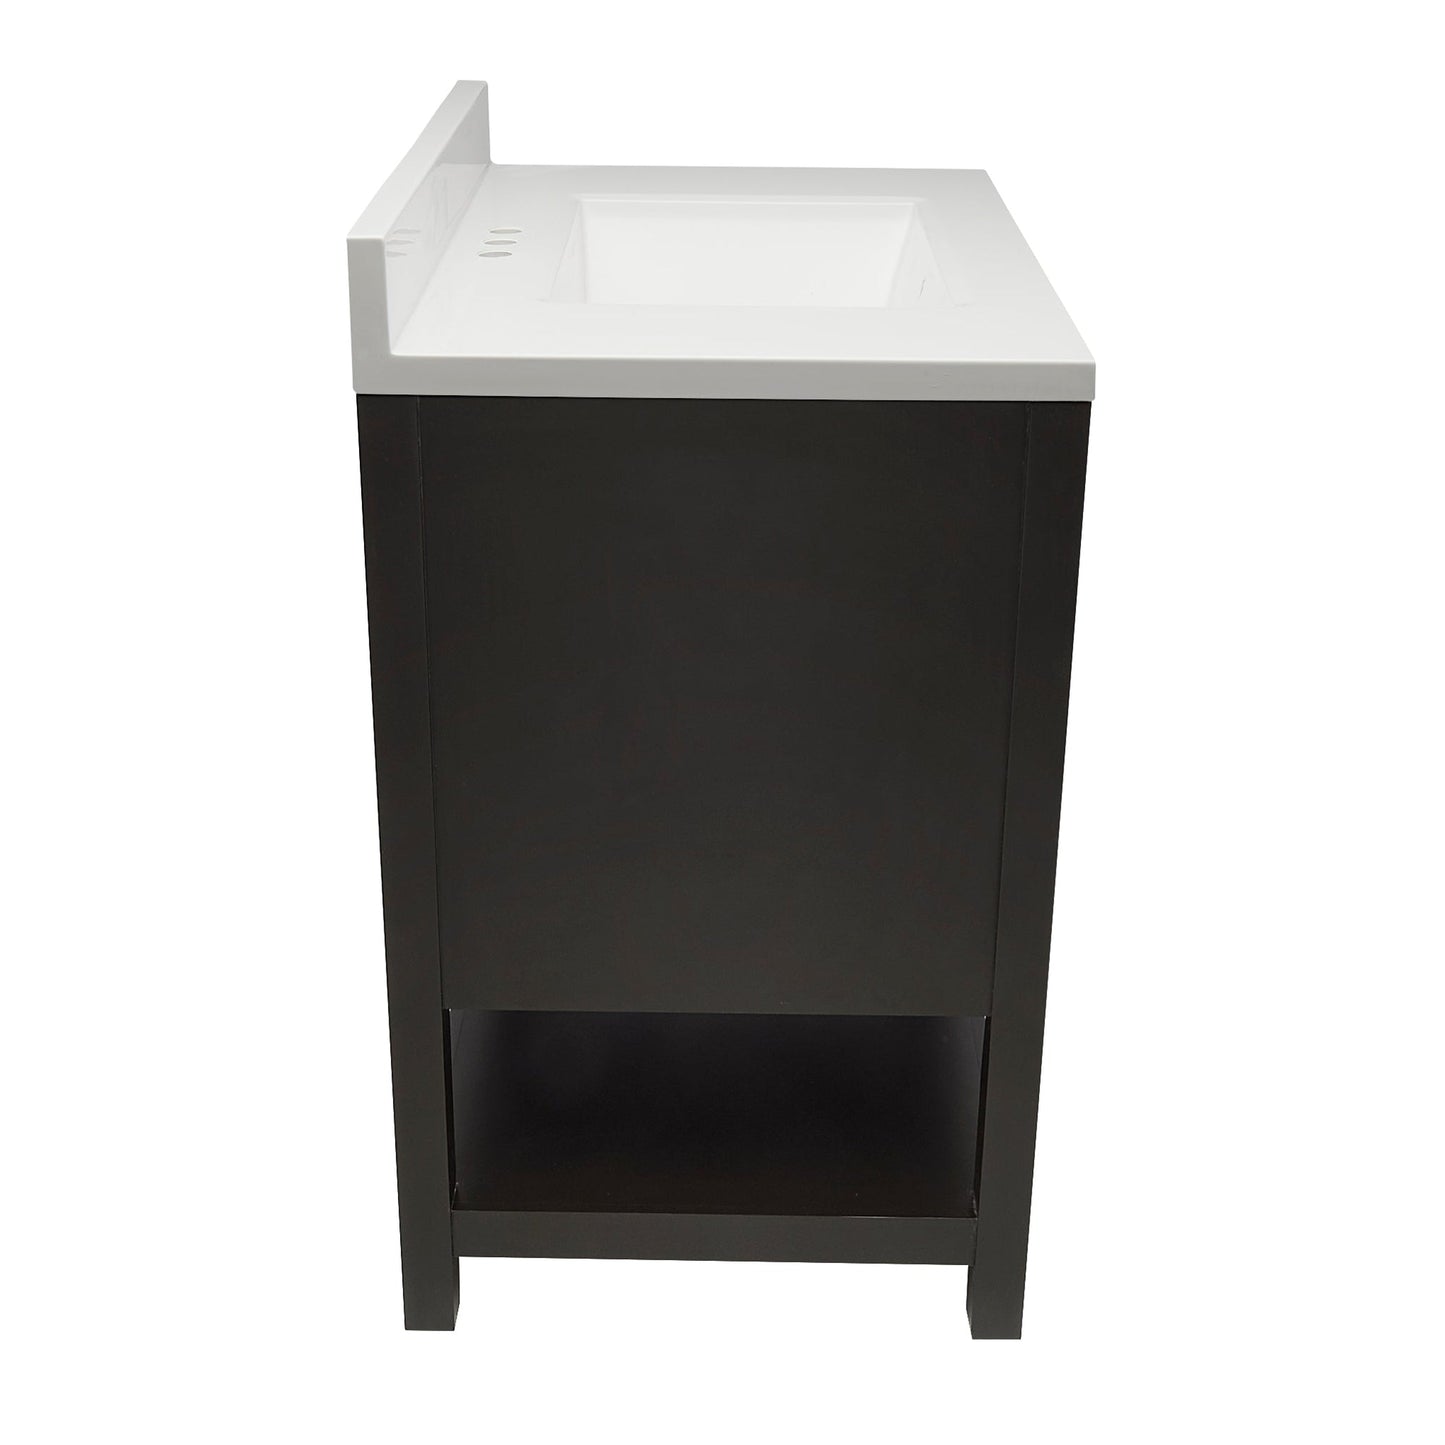 Ella's Bubbles Taos 31" Espresso Bathroom Vanity With White Cultured Marble Top With Backsplash and Sink